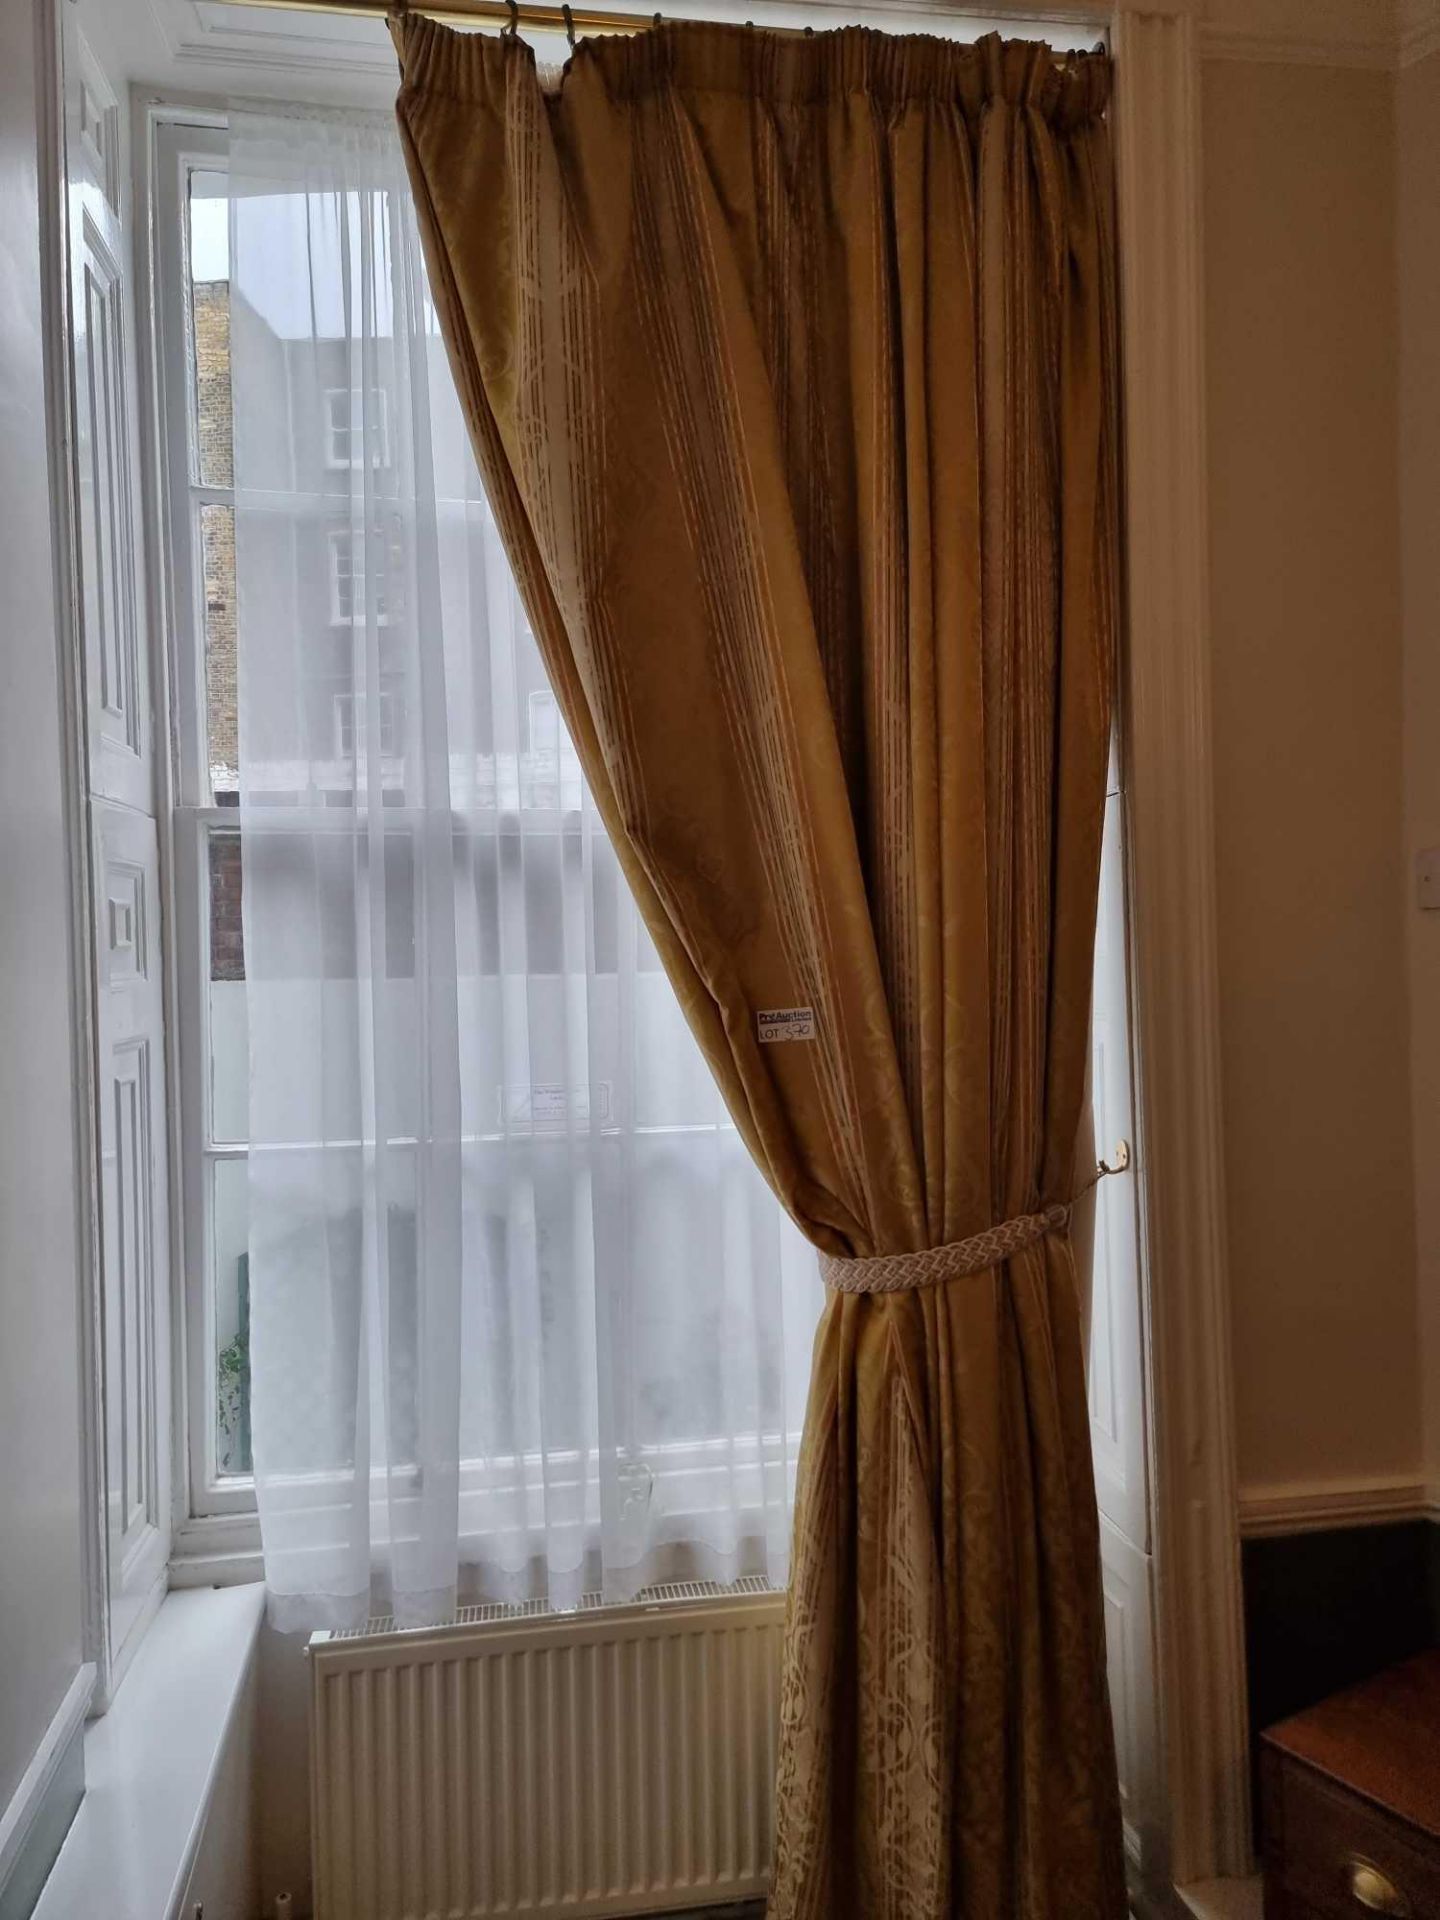 A Single Panel Drape Curtain In Gold Stripped Pattern On A Polished Brass Pole Spans 140 X 290cm (